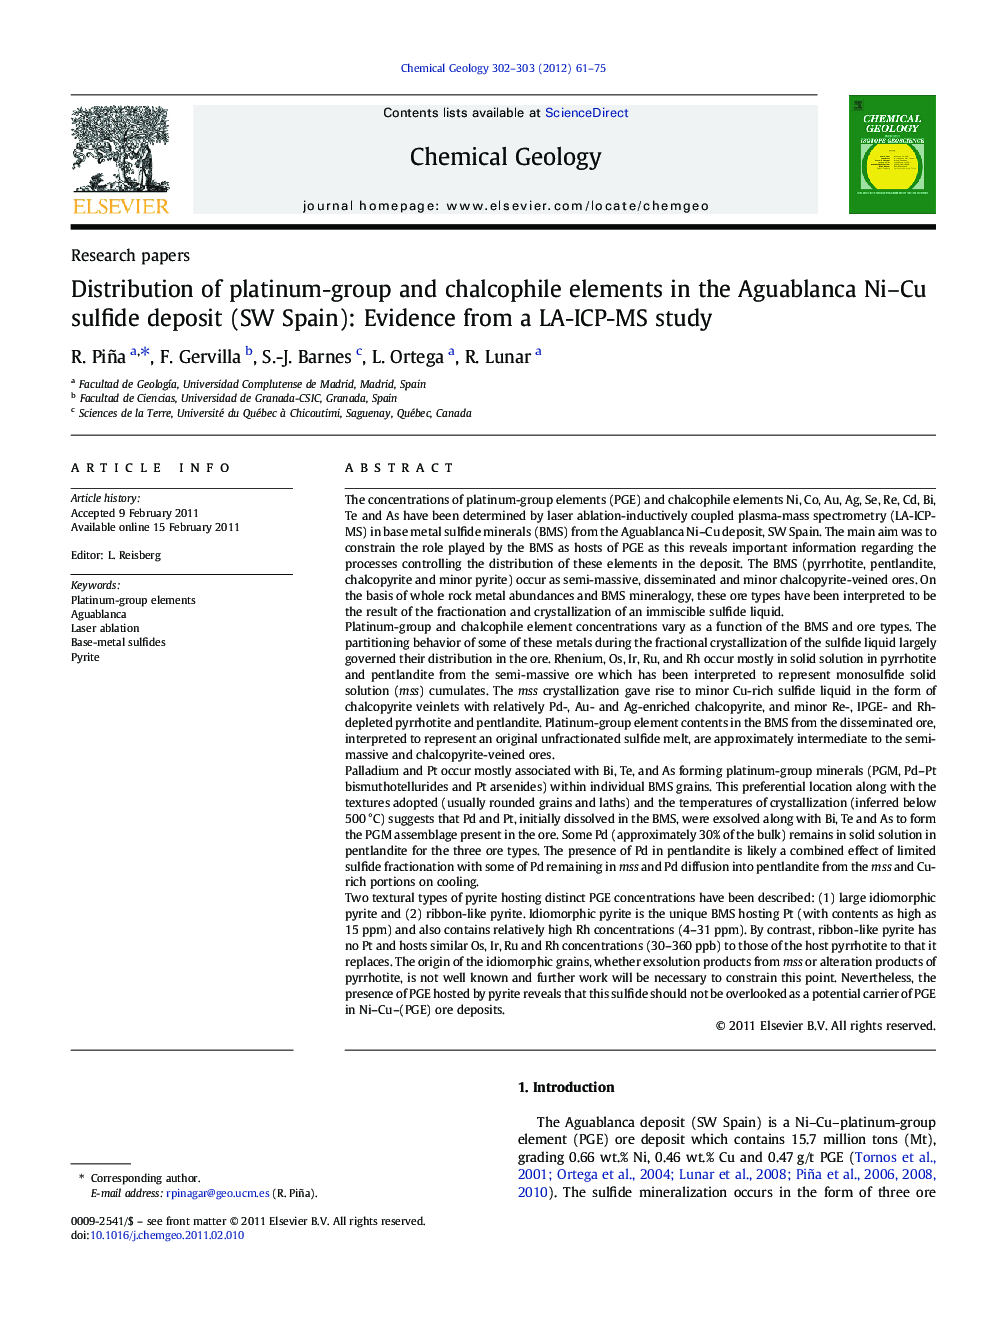 Distribution of platinum-group and chalcophile elements in the Aguablanca Ni–Cu sulfide deposit (SW Spain): Evidence from a LA-ICP-MS study